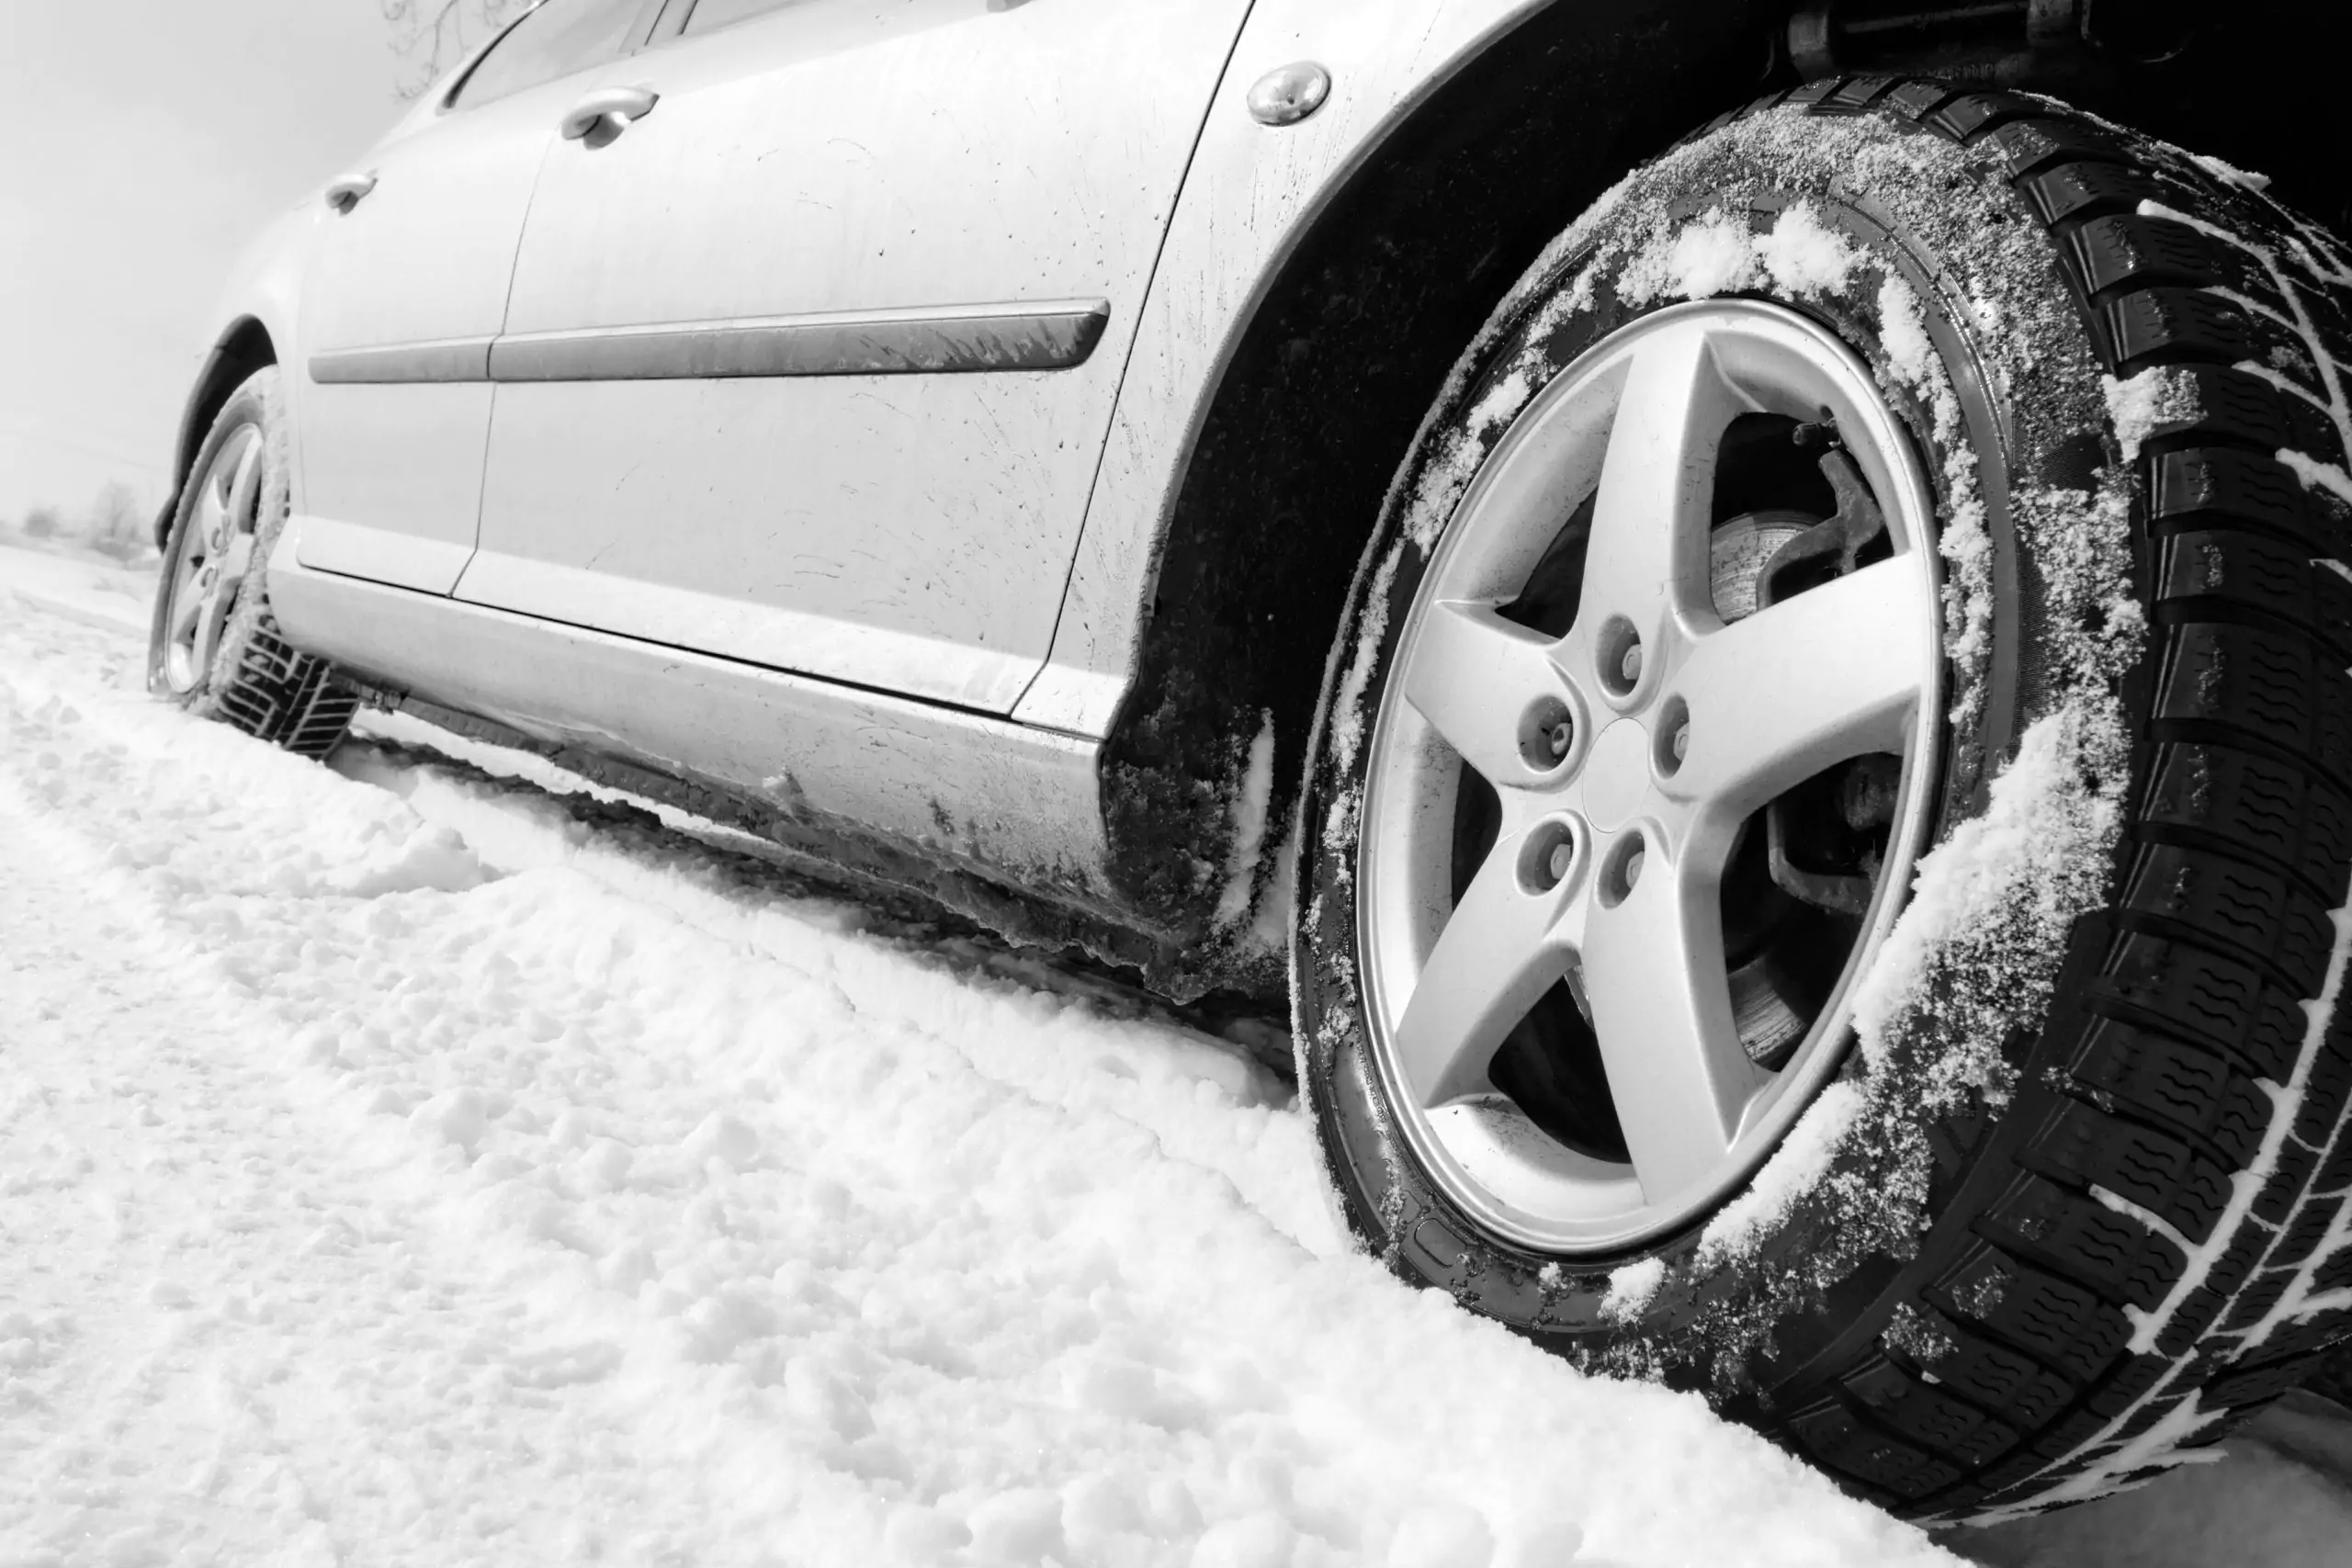 Winter Brings Slippery Conditions, Accidents on New York Roads